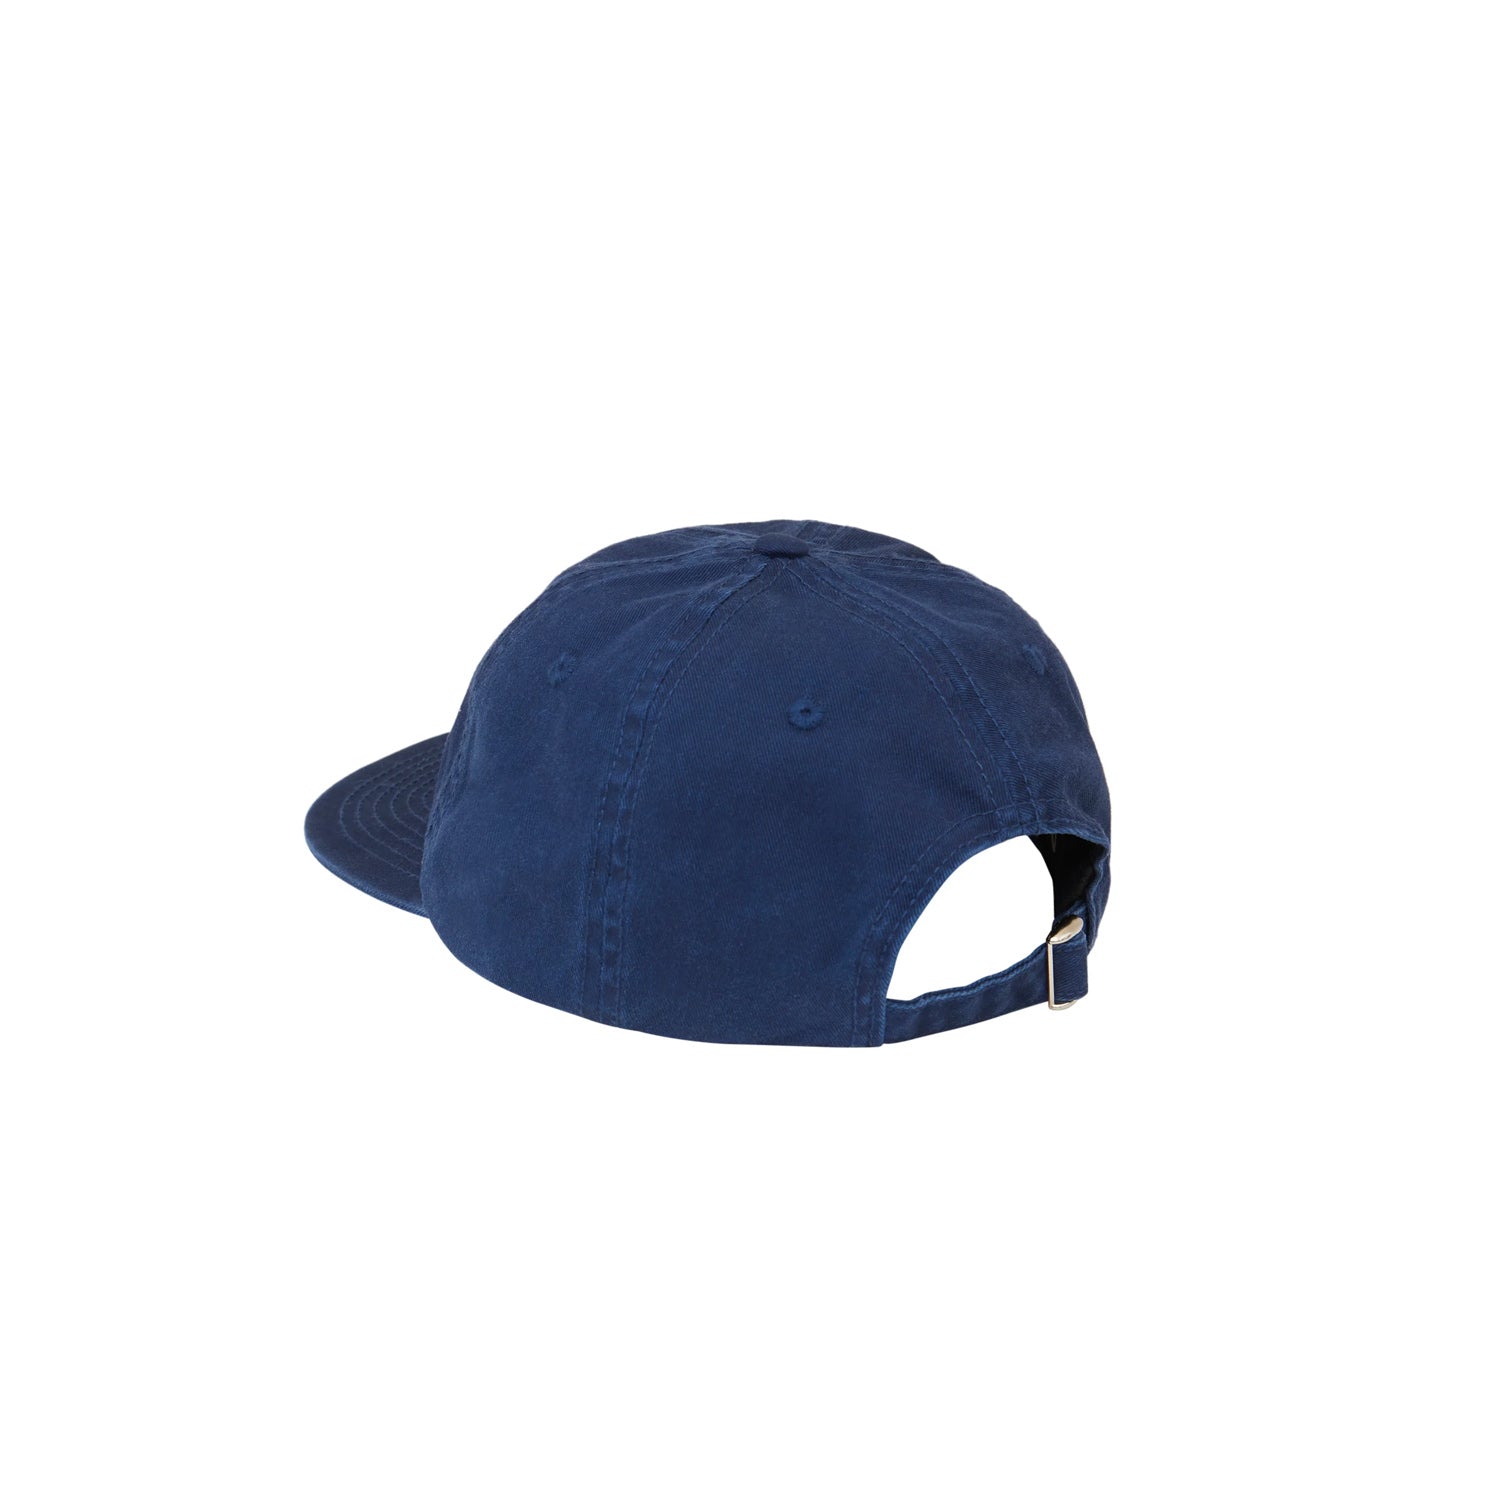 Lodge Polo Hat NAVY/NAVY ONLYNY